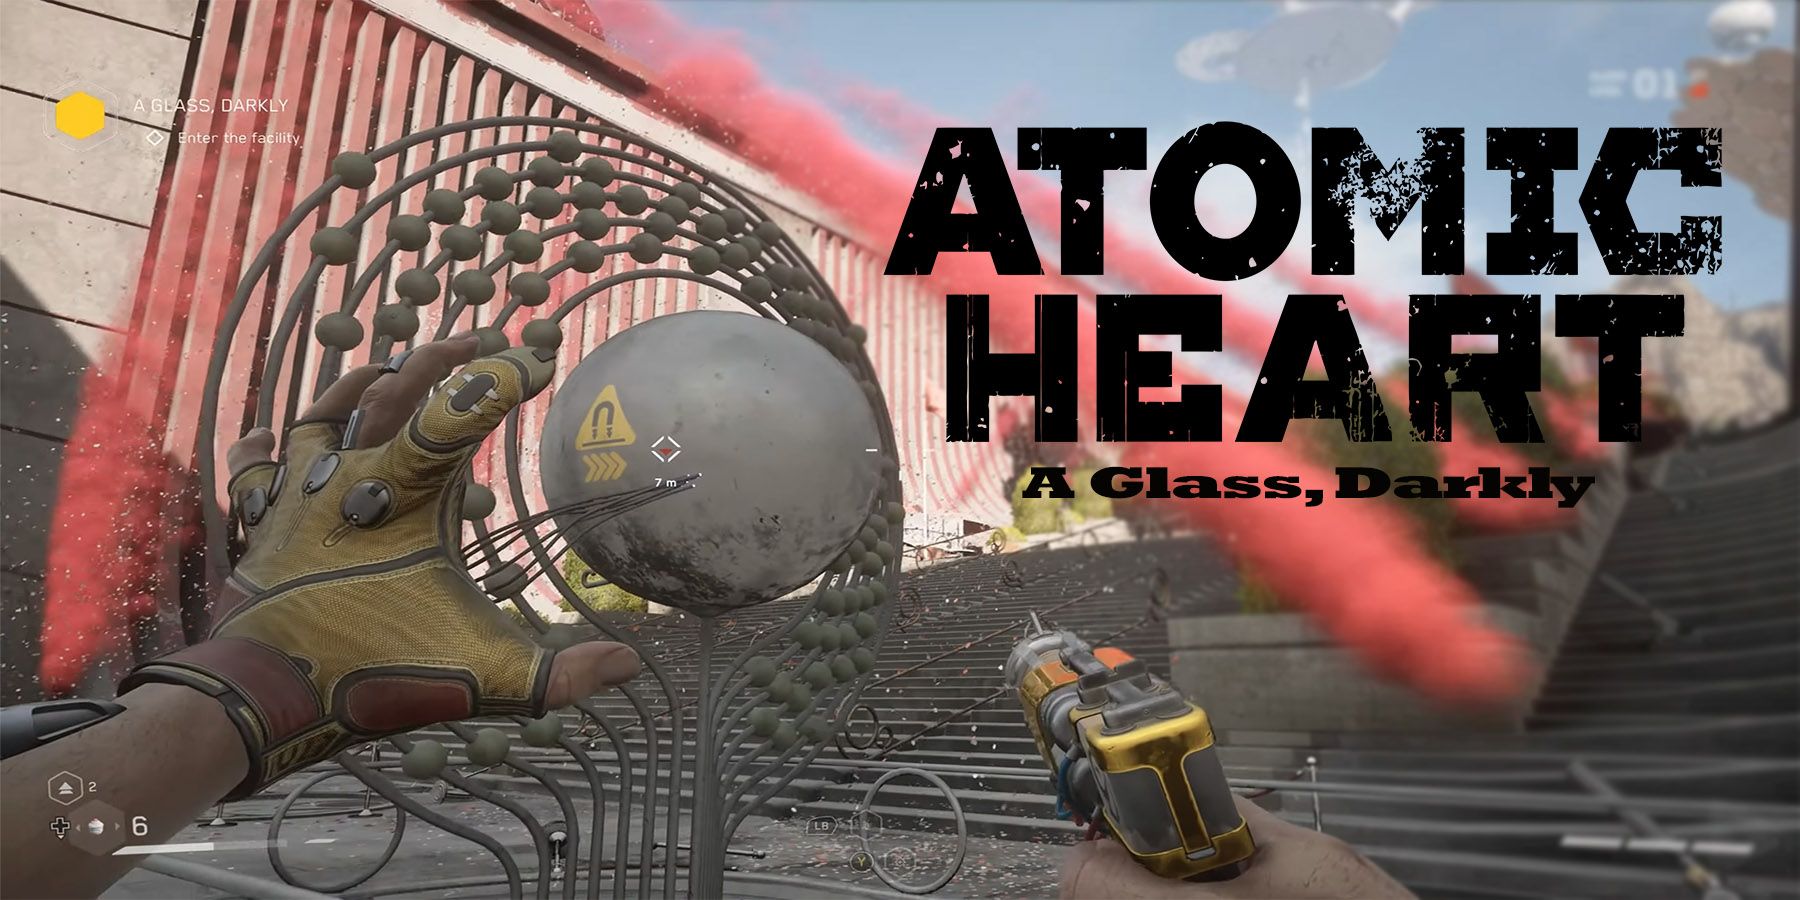 complete guide for a glass darkly mission in atomic heart. 